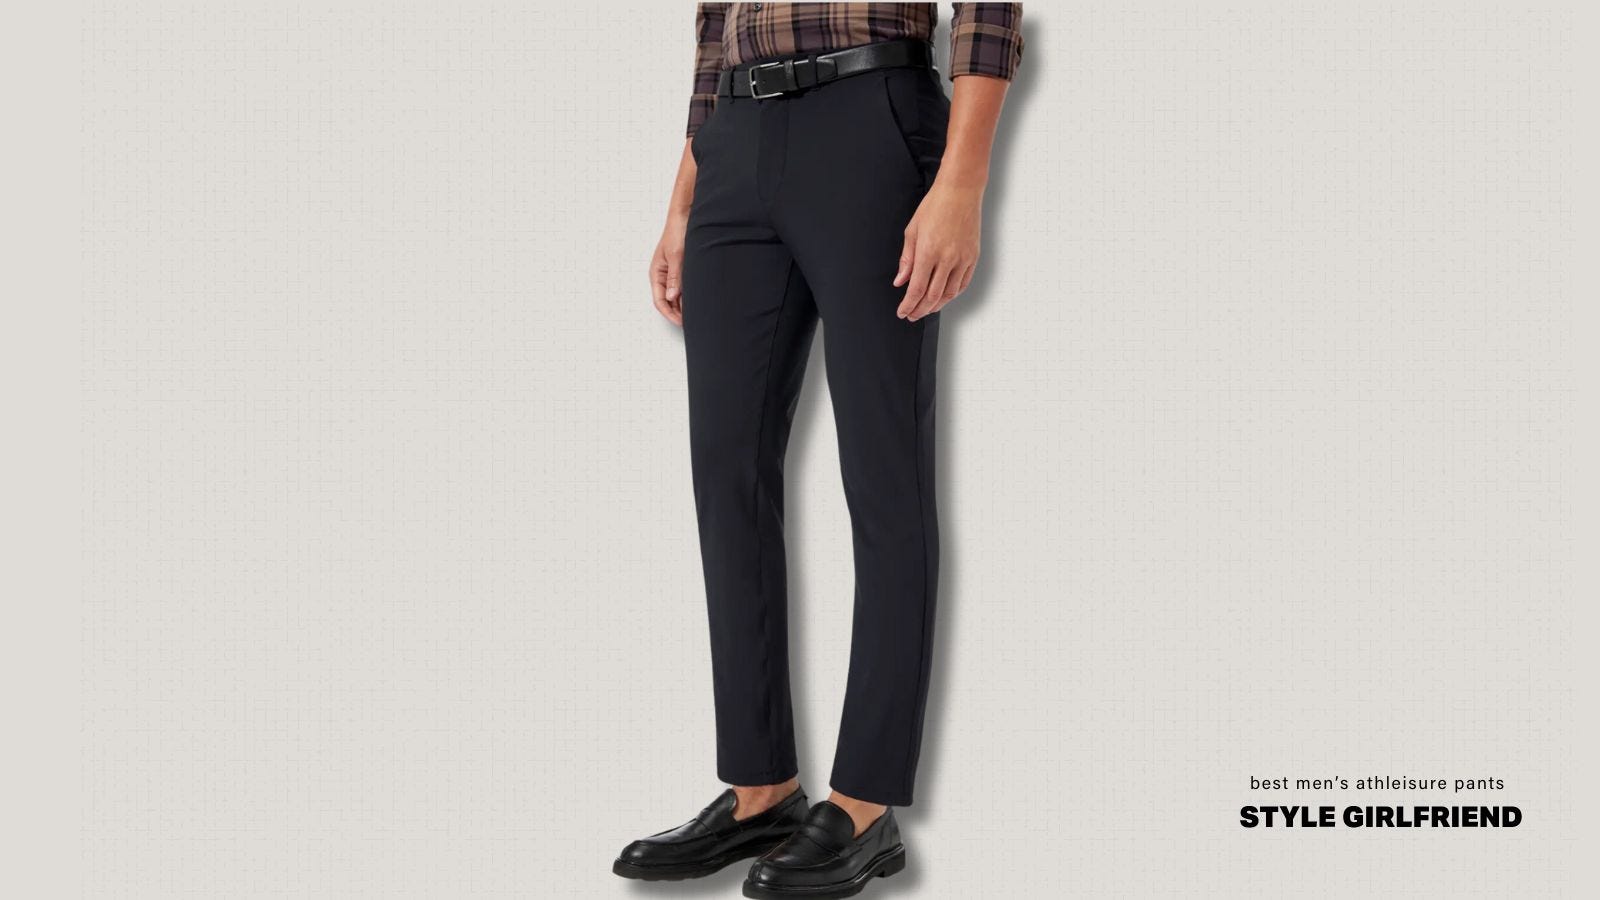 best dressy athleisure pants for work - image of the lower half of a man wearing black chinos with loafers